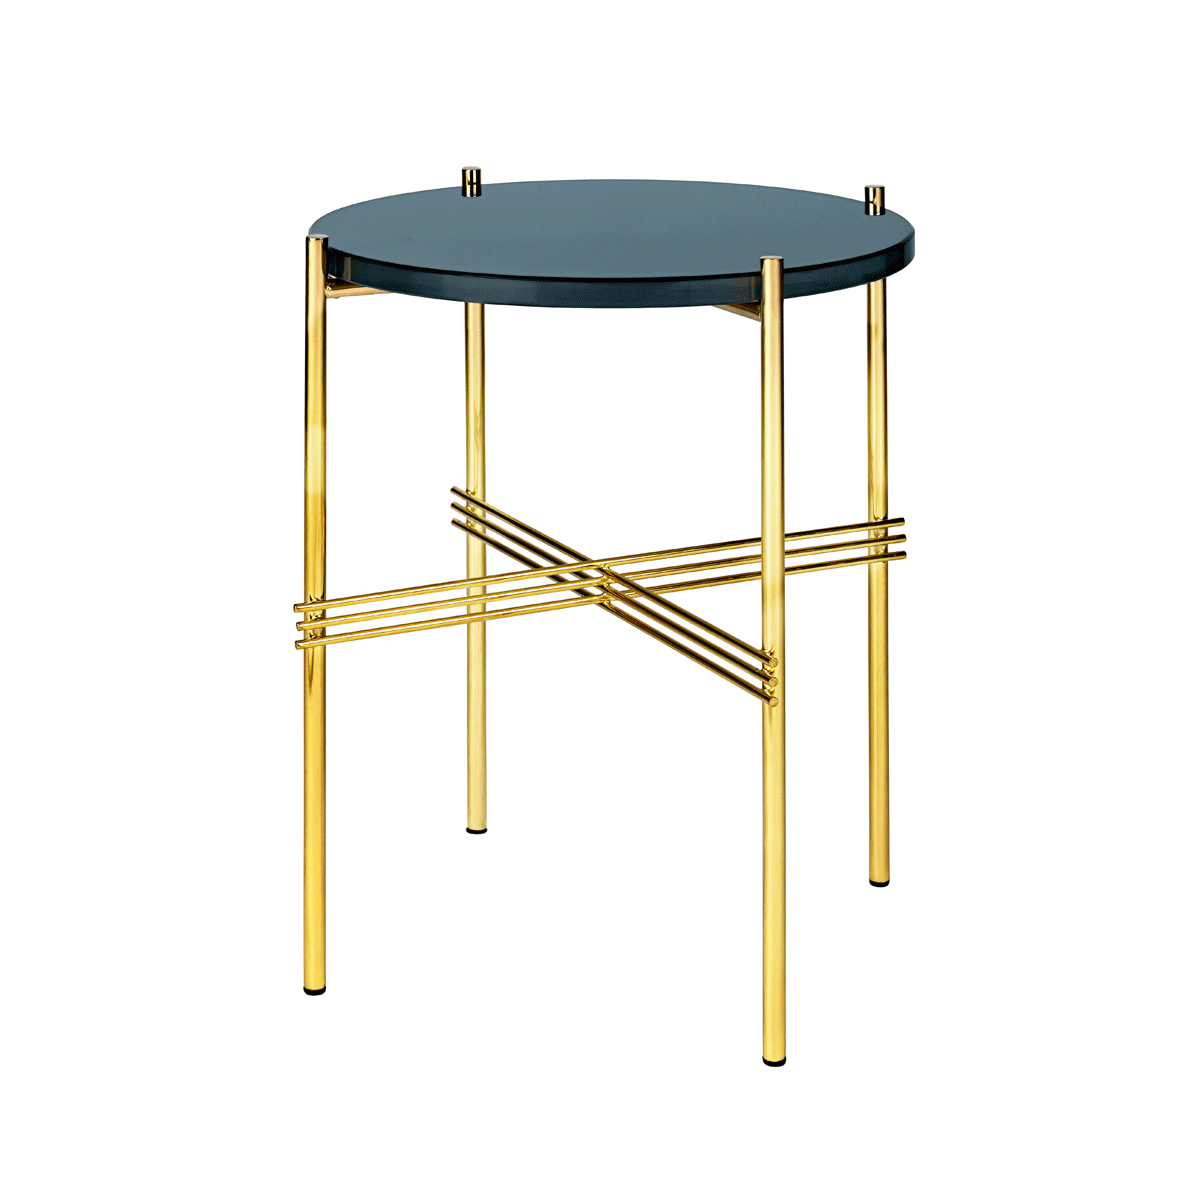 glass accent table trnk gubi blue grey brass small wide bedside drawers pottery barn living room sets inexpensive lamps outside patio set modular sofas for spaces black mirrored